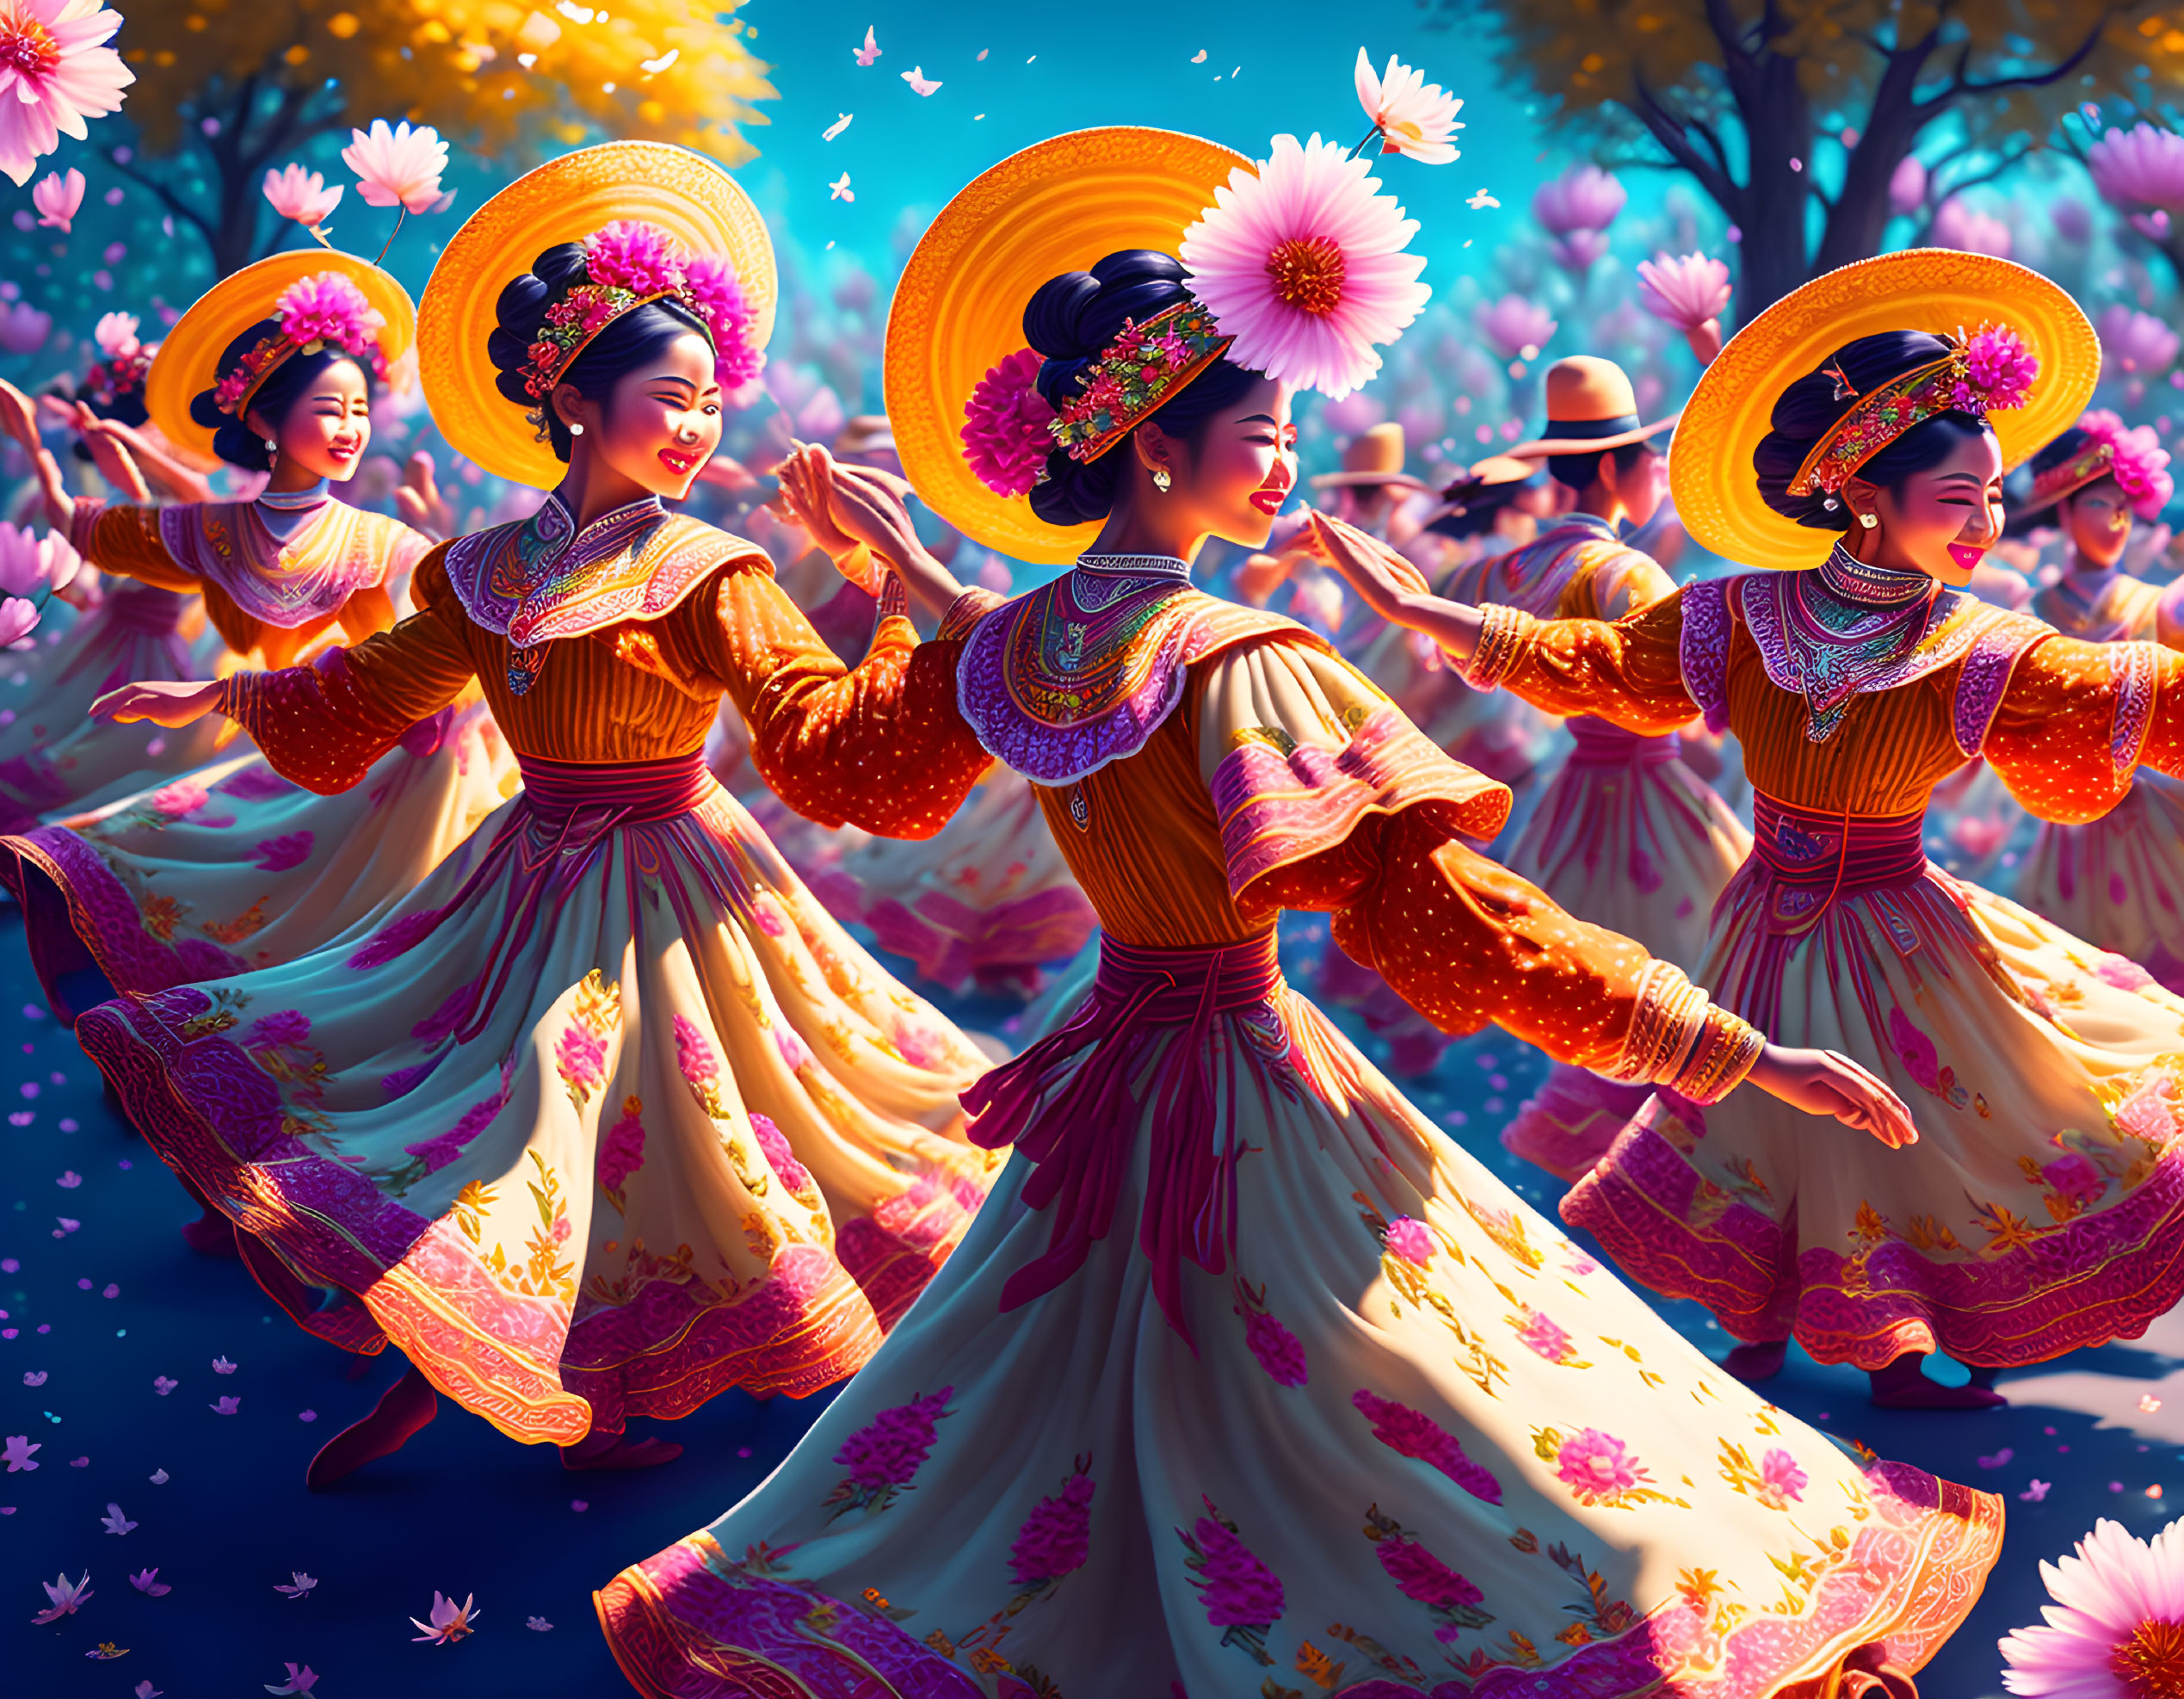 Women in ornate dresses dancing among cherry blossoms.